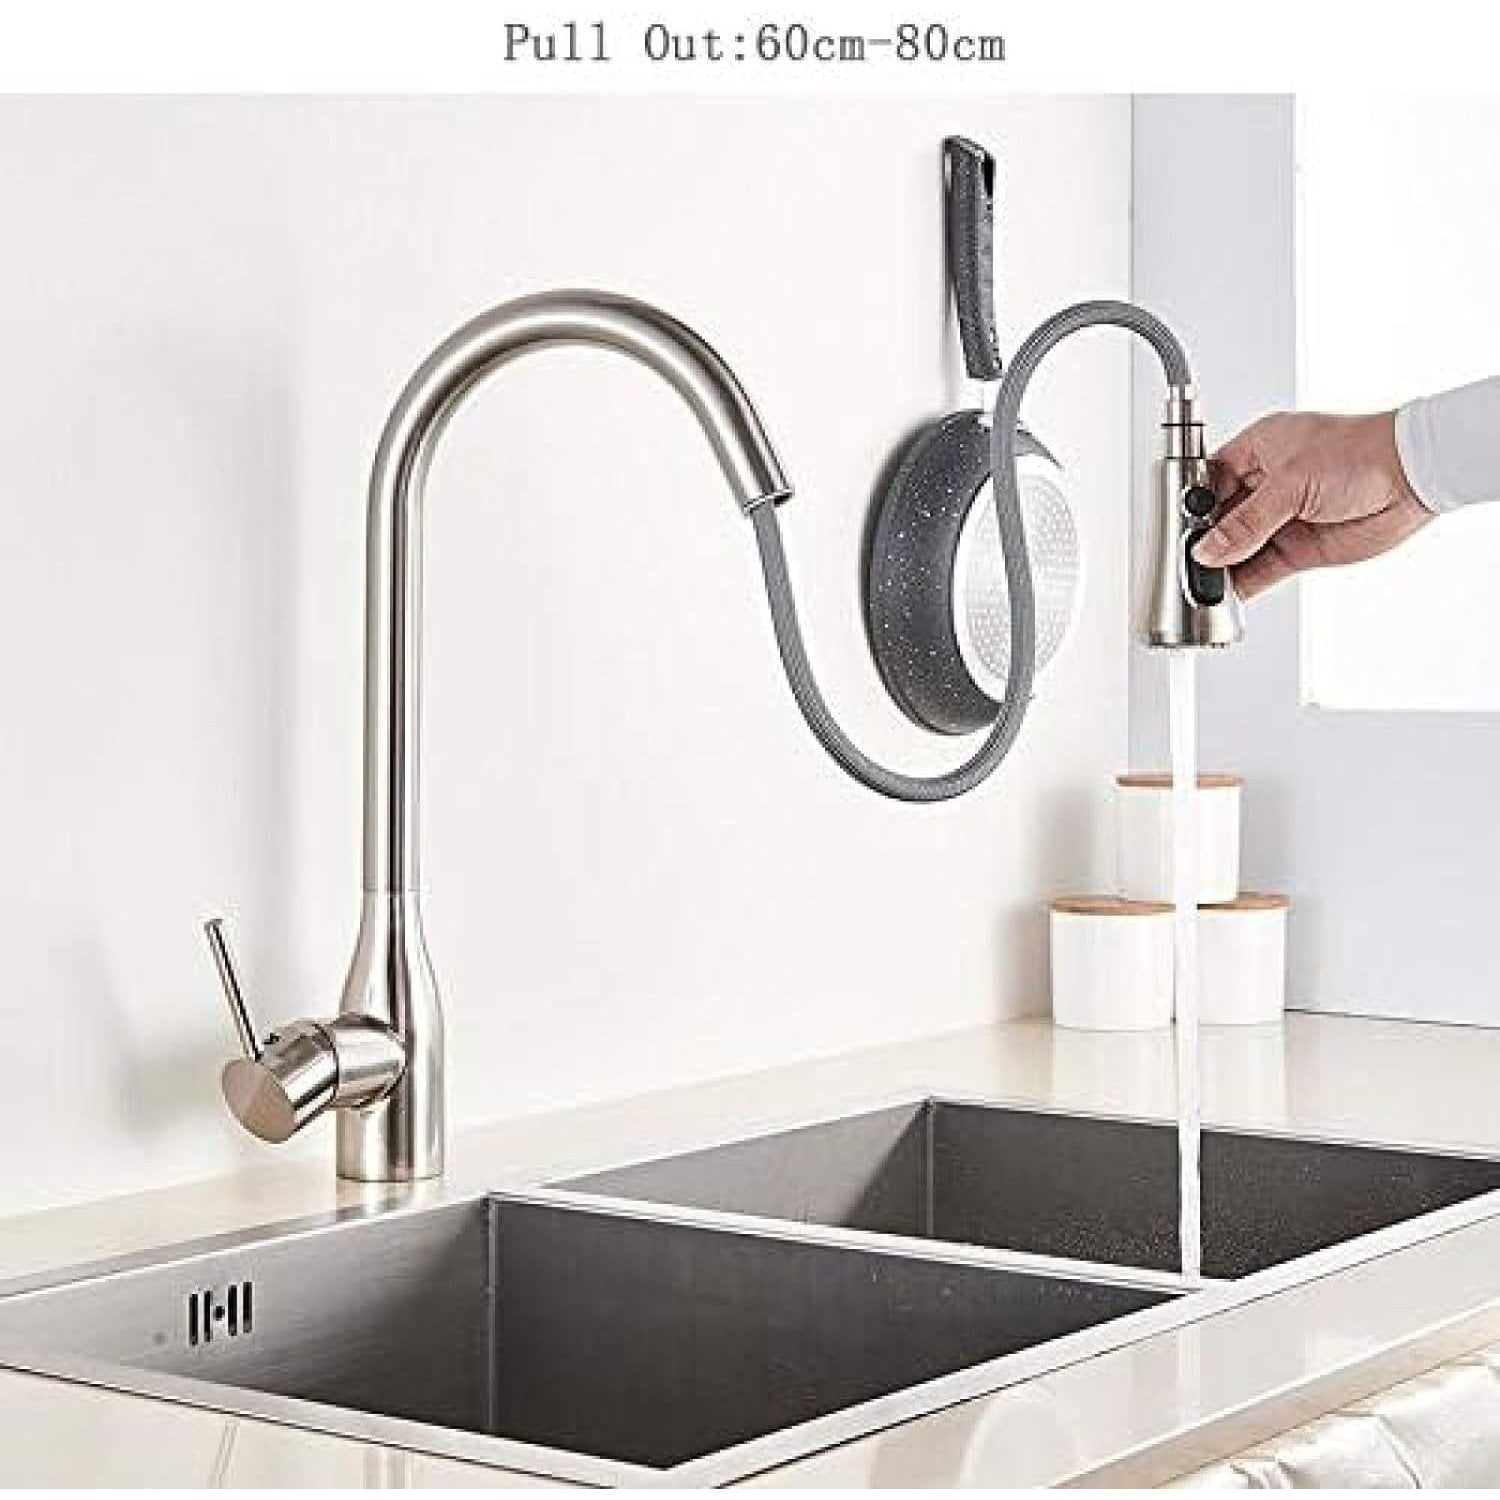 Buy Stainless Steel Satin Nickel Pull Out Sprayer Kitchen Sink Faucet Tap - P02001BN | Shop at Supply Master Accra, Ghana Kitchen Tap Buy Tools hardware Building materials